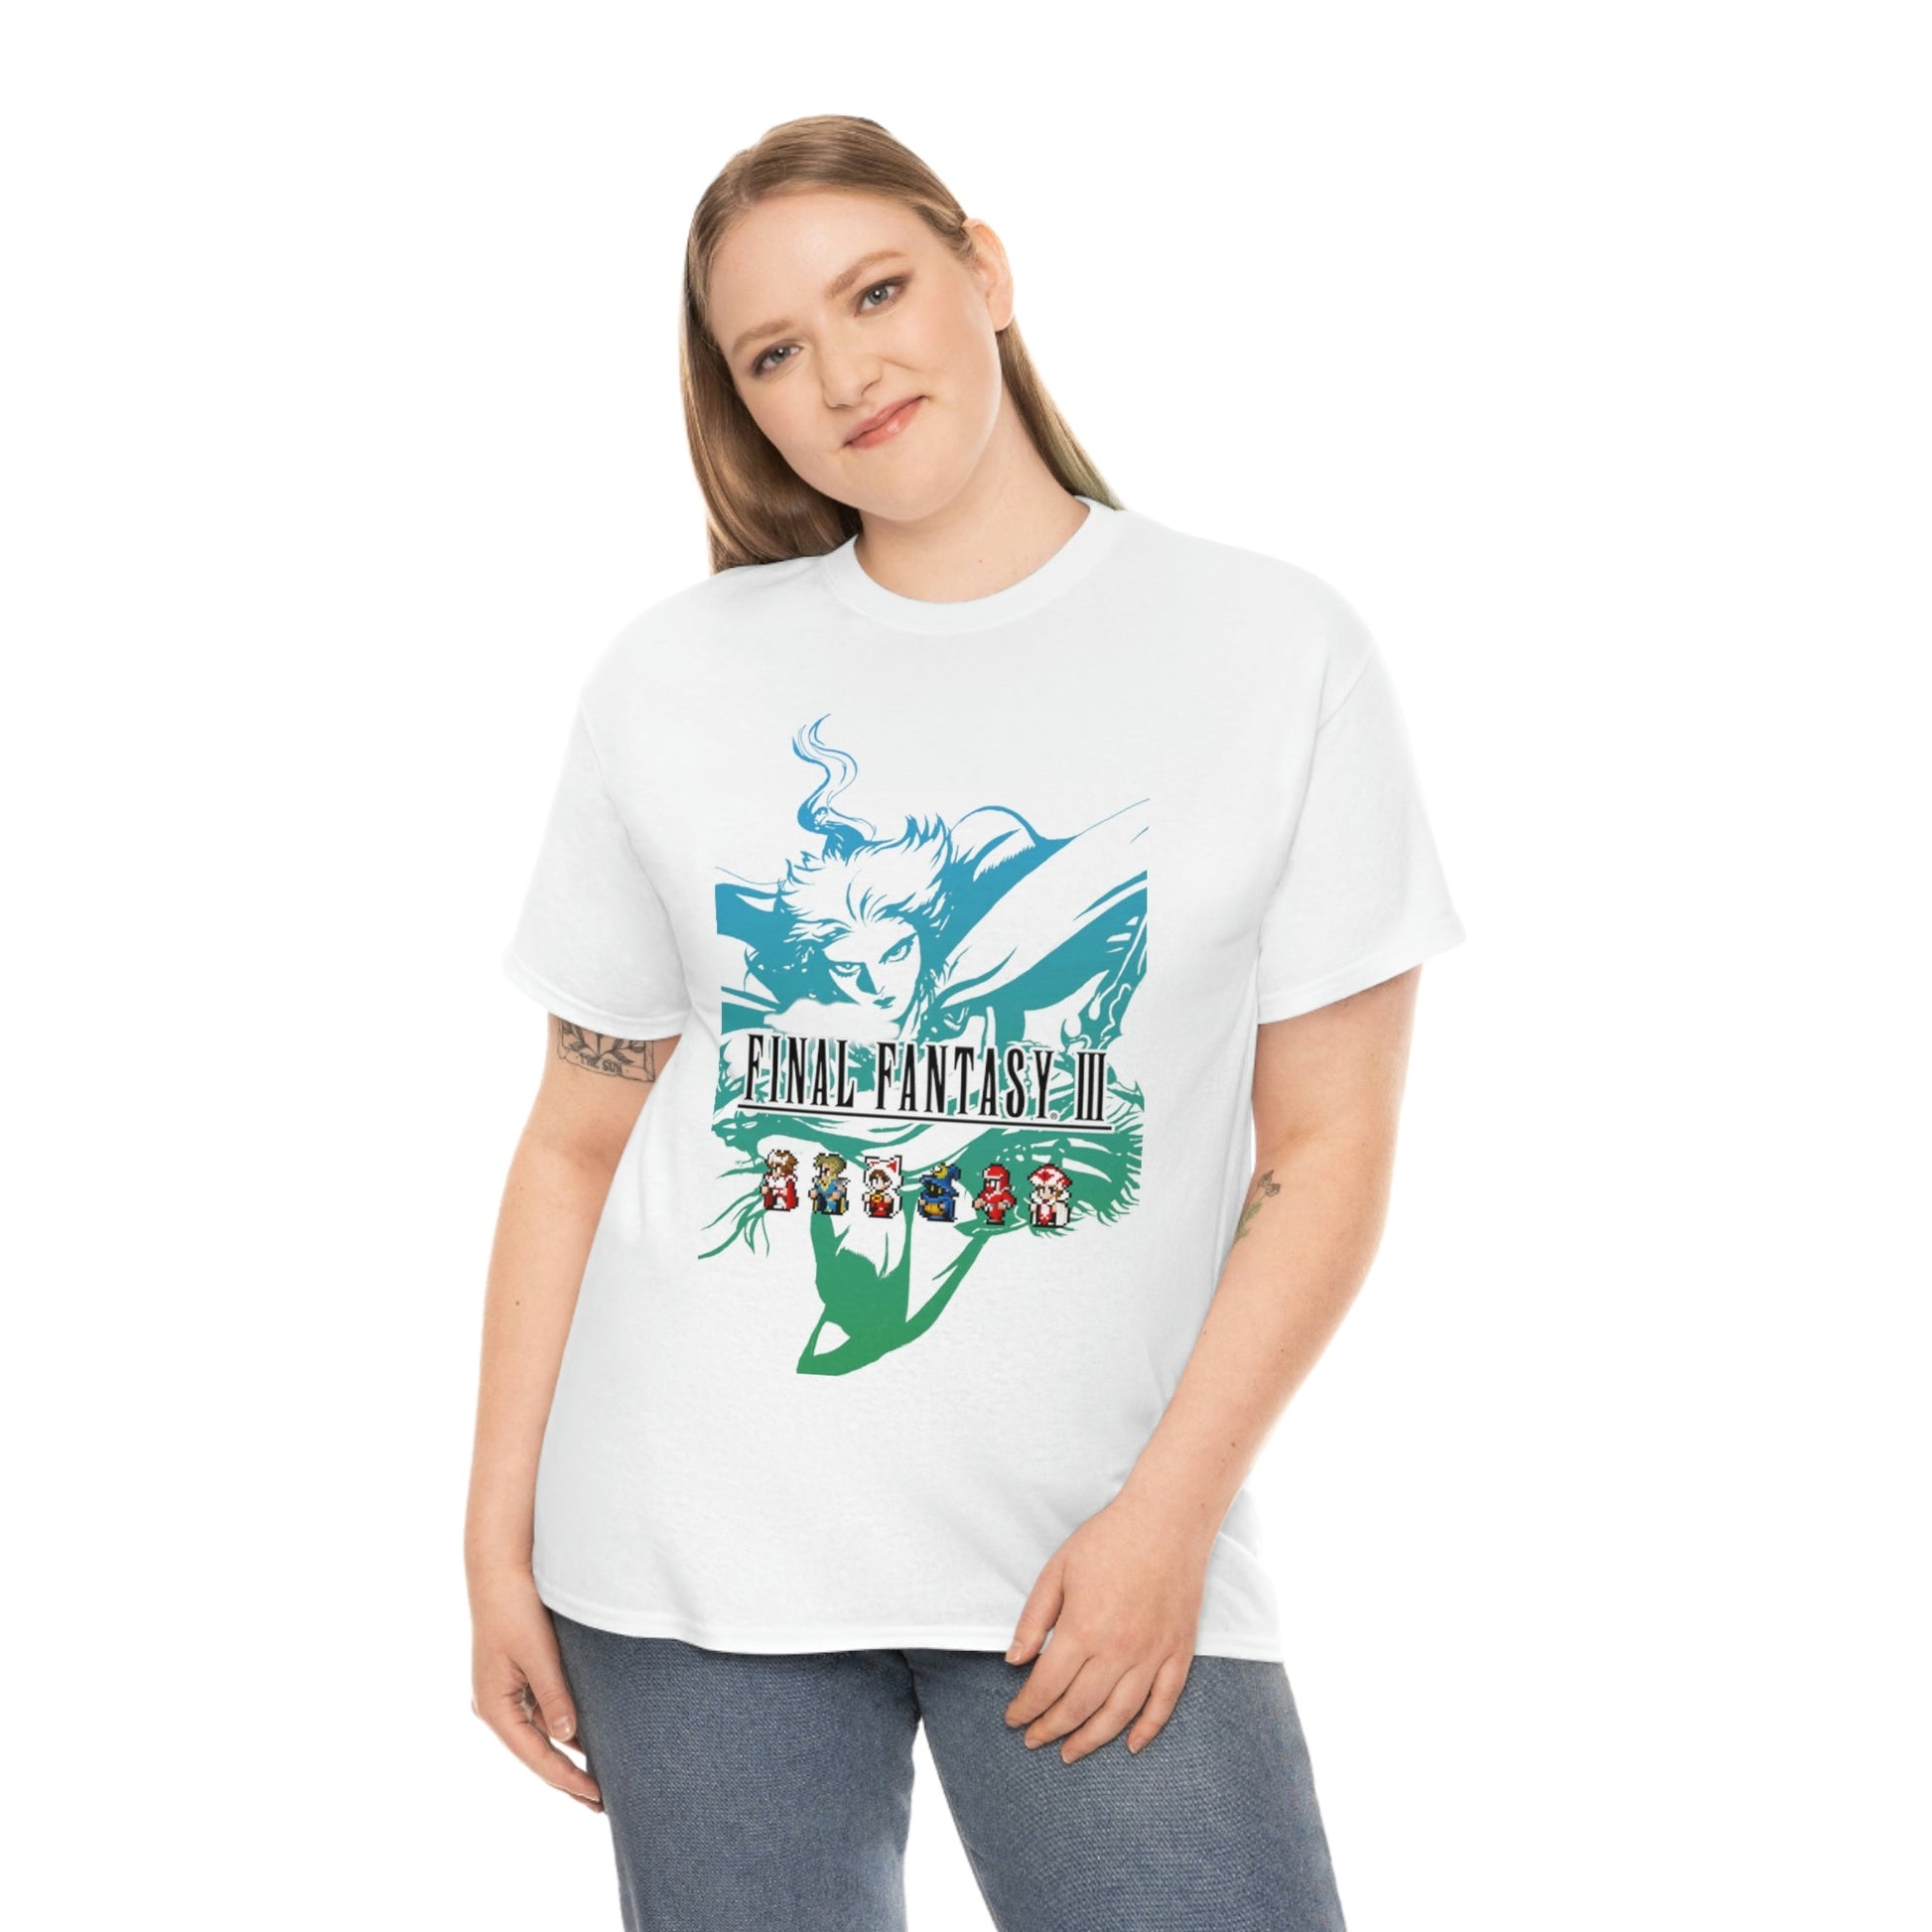 Final Fantasy 3 T-Shirts | Unisex Fitted T-Shirts | RetroTeeShop